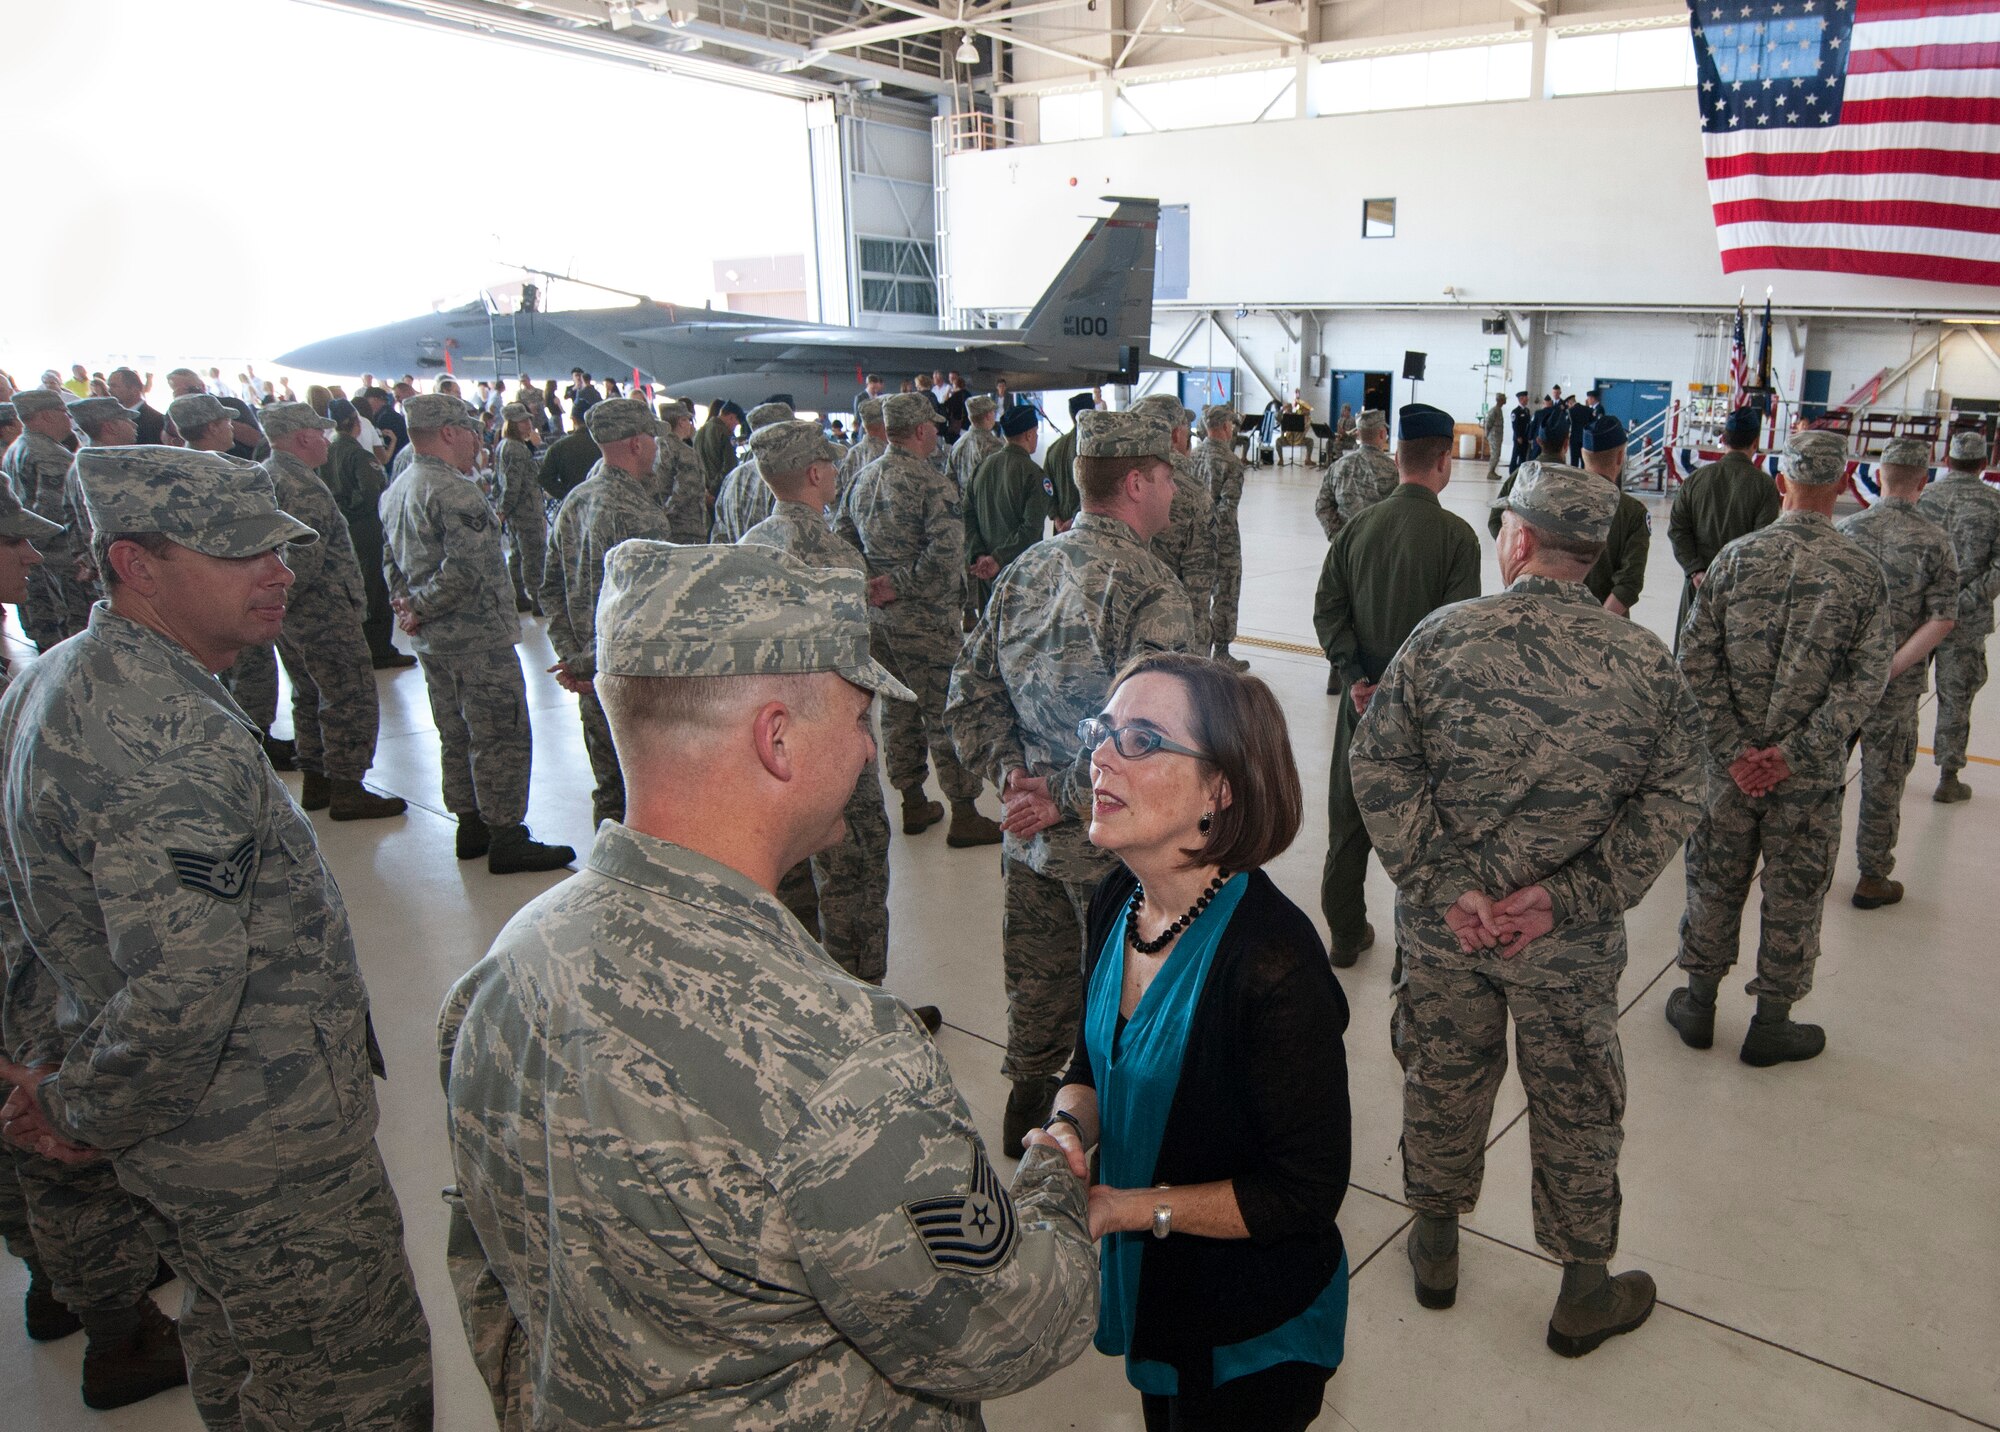 Oregon Governor Kate Brown greets deploying Airmen from the 142nd Fighter Wing following the formal mobilization ceremony, June 26, 2015, Portland Air National Guard Base, Ore.   The unit is deploying to Eastern Europe in support of Operation Atlantic Resolve.  (U.S. Air National Guard photo by Tech. Sgt. John Hughel, 142nd Fighter Wing Public Affairs/Released)